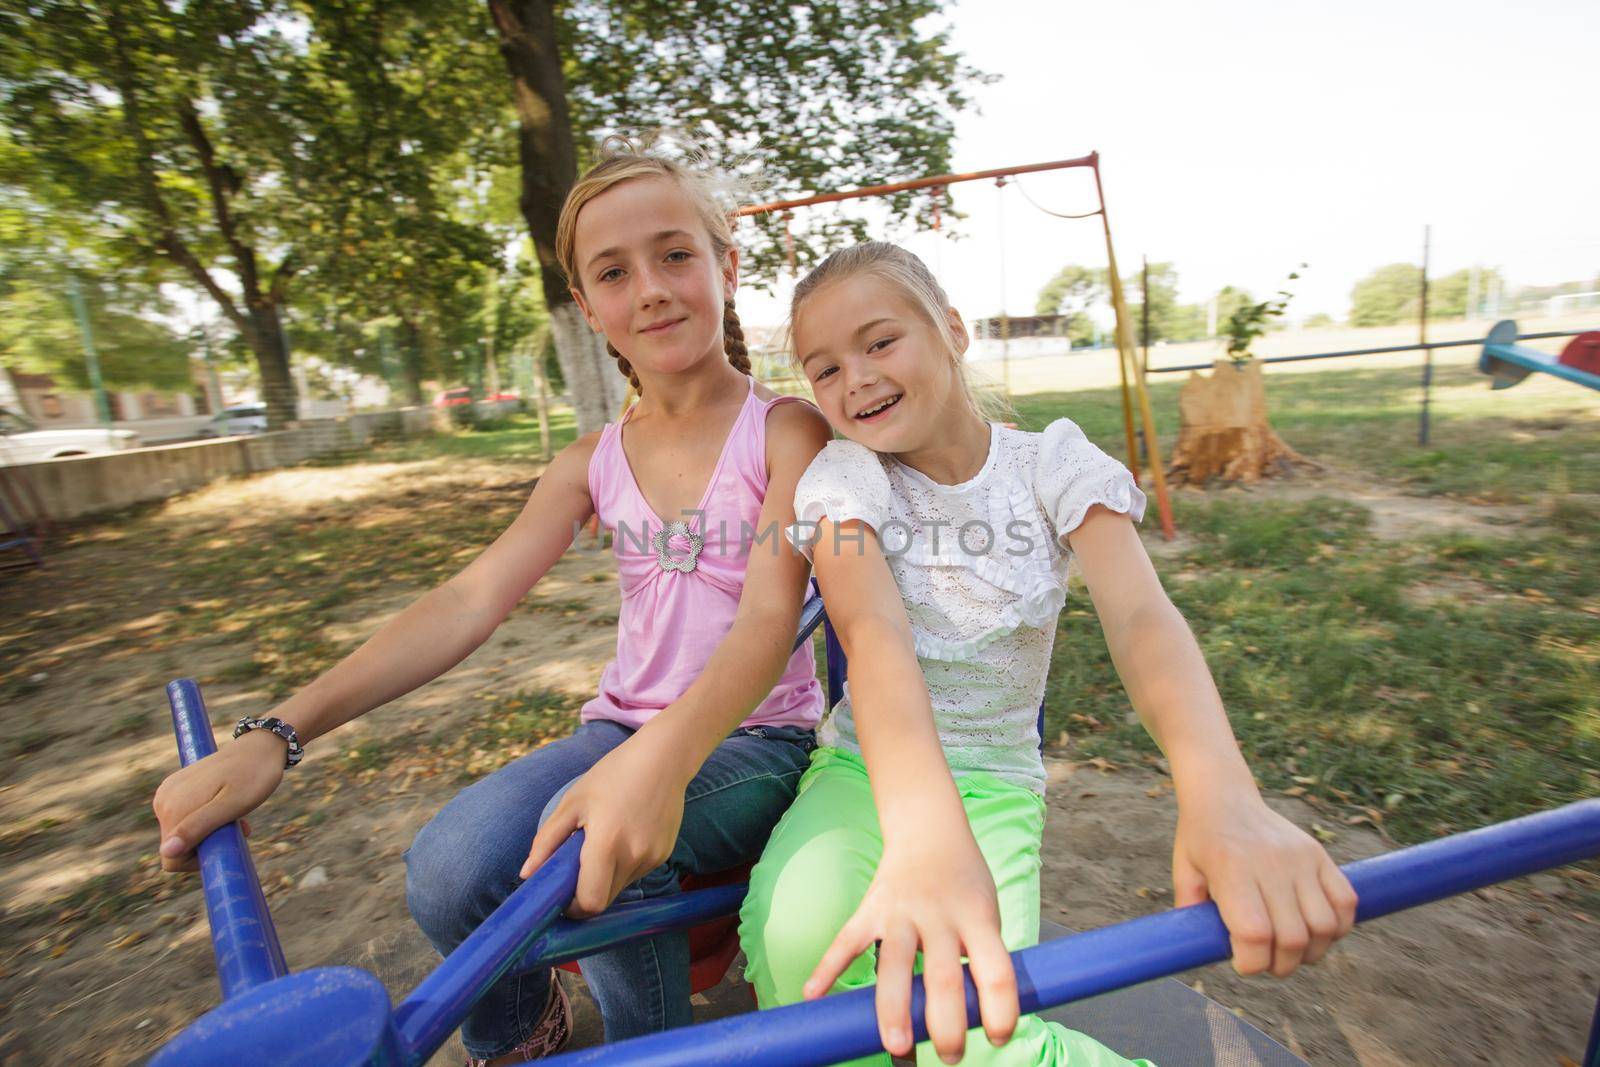 Two girls on the carousel at the playground